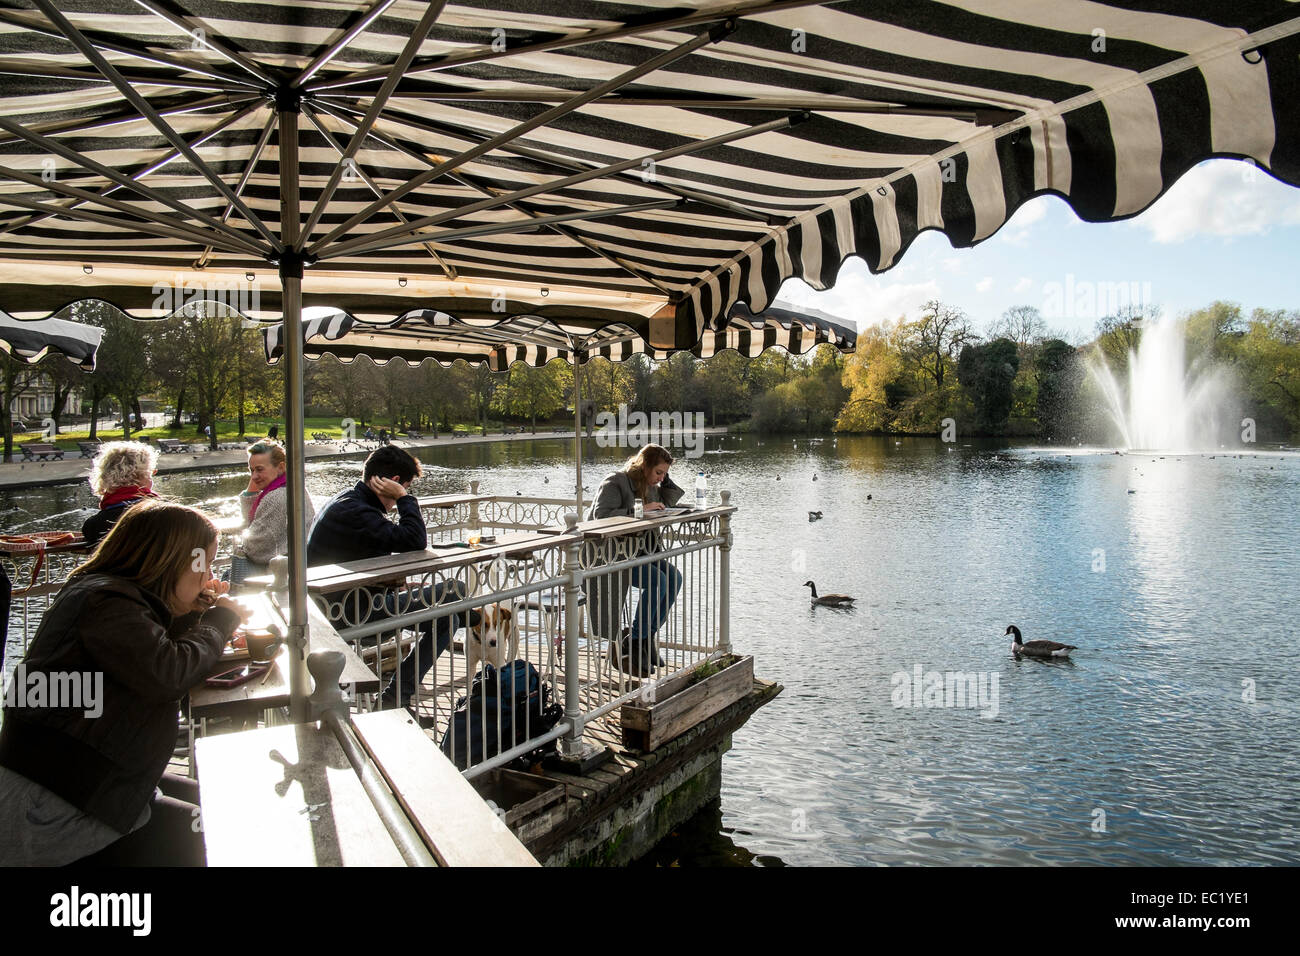 Terrace cafe overlooking the lake with a fountain, Victoria Park, Hackney, London, United Kingdom Stock Photo